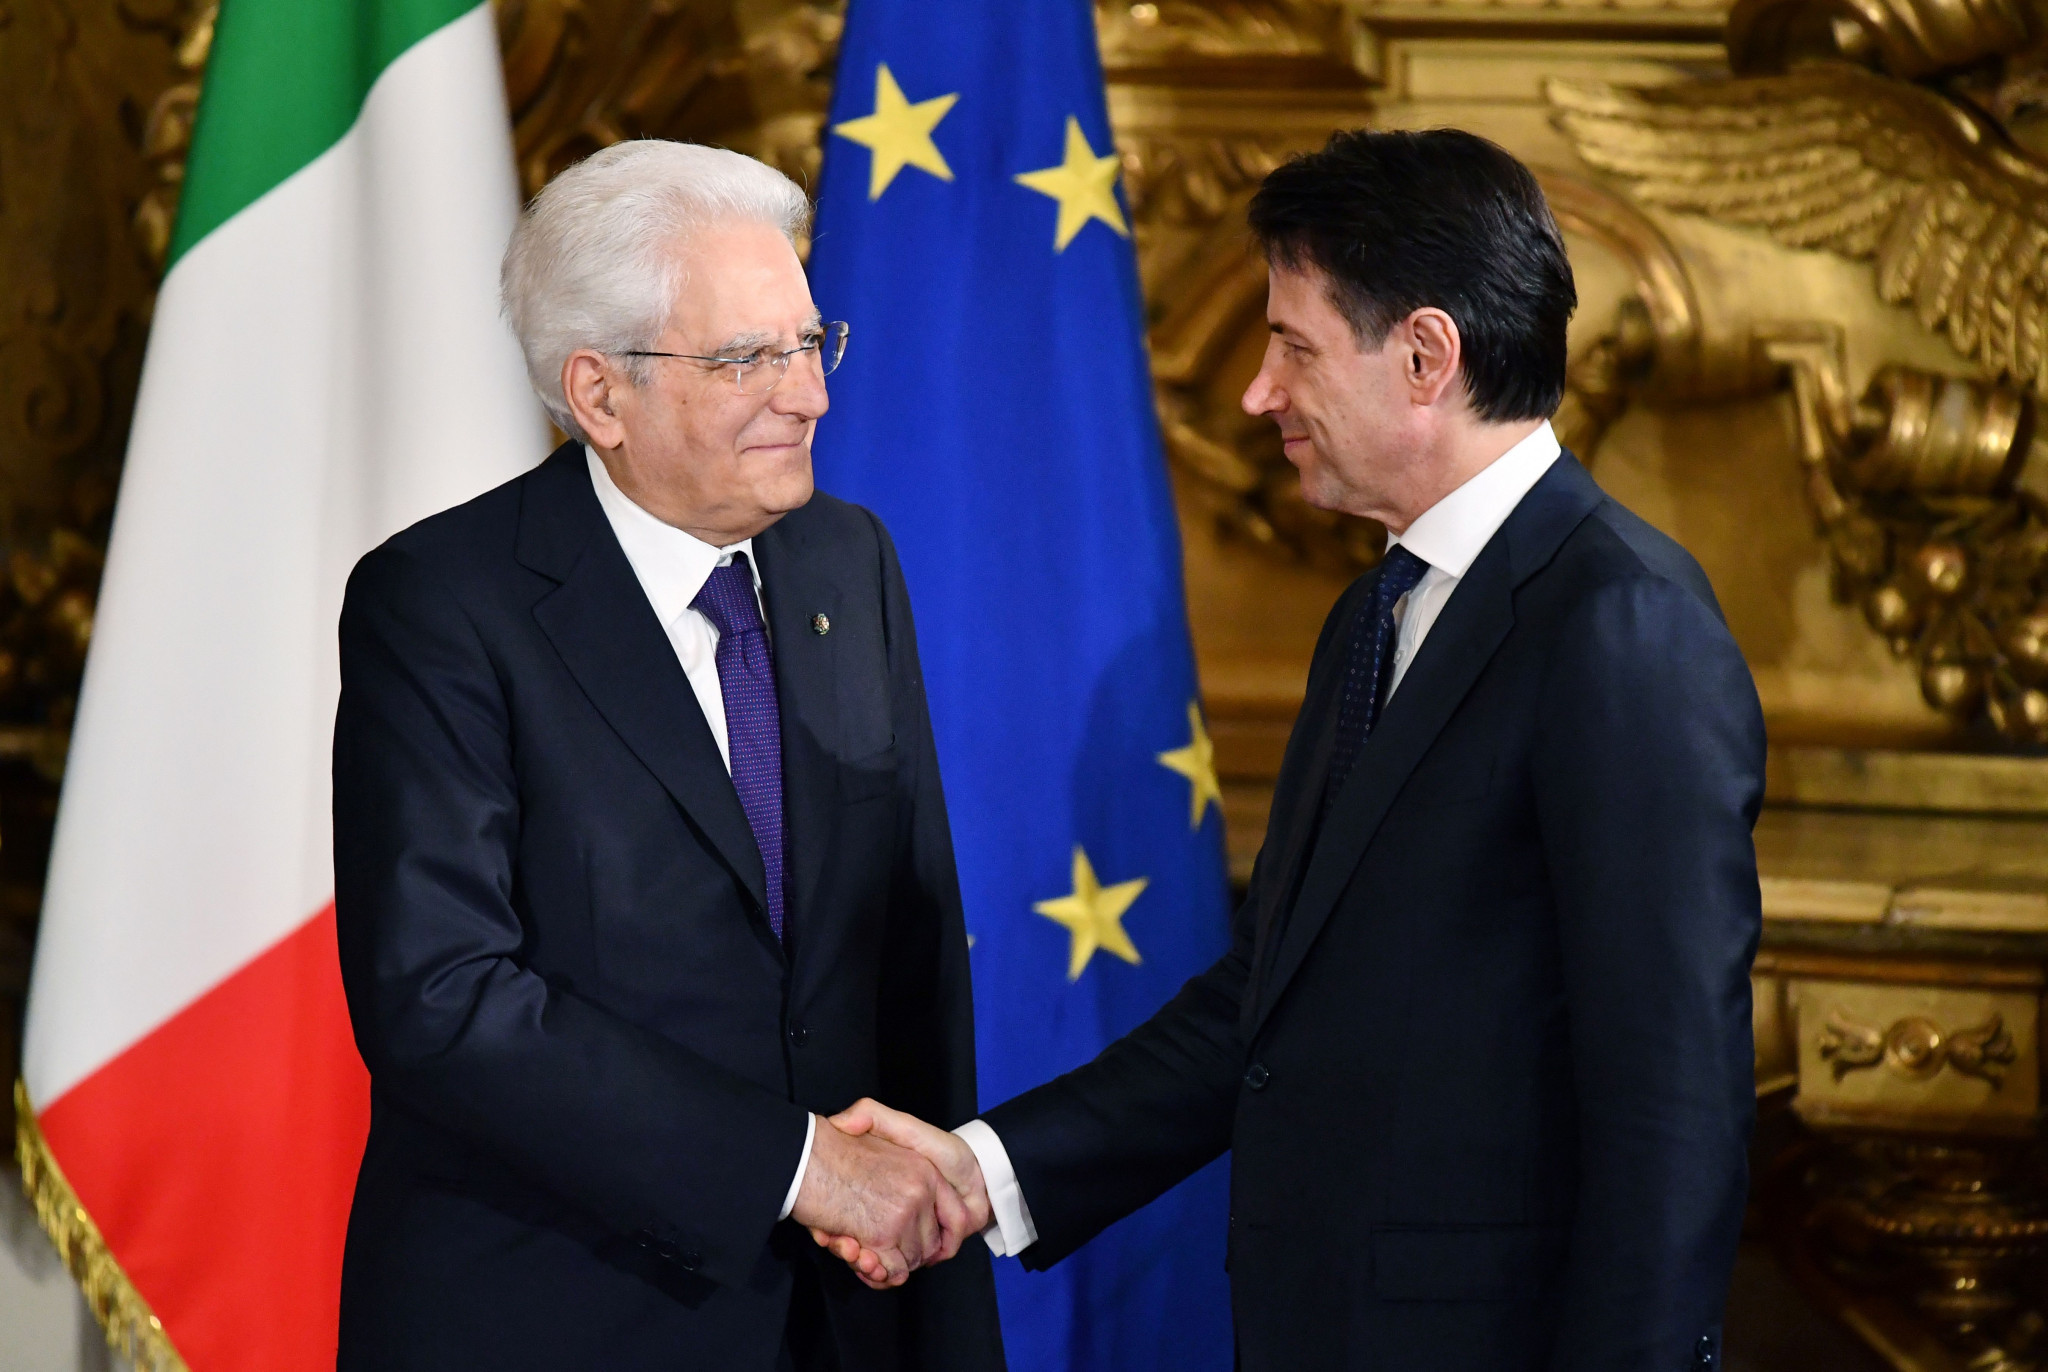 New Government gives boost to Italian bid for 2026 Winter Olympics